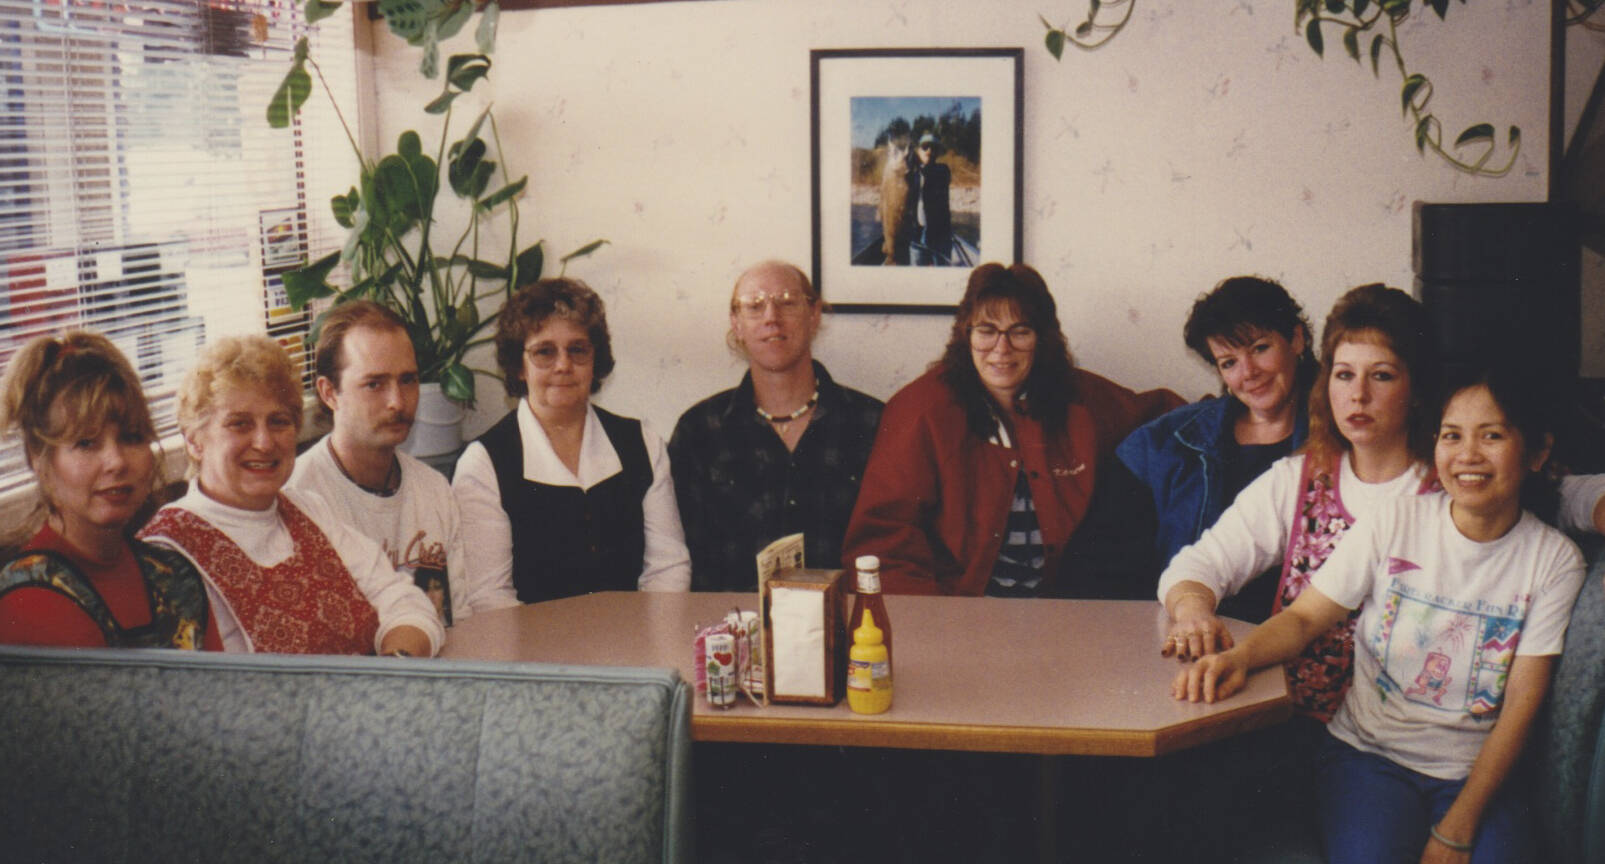 Coffee shop crew circa mid-1990s. Forks Forum Archives